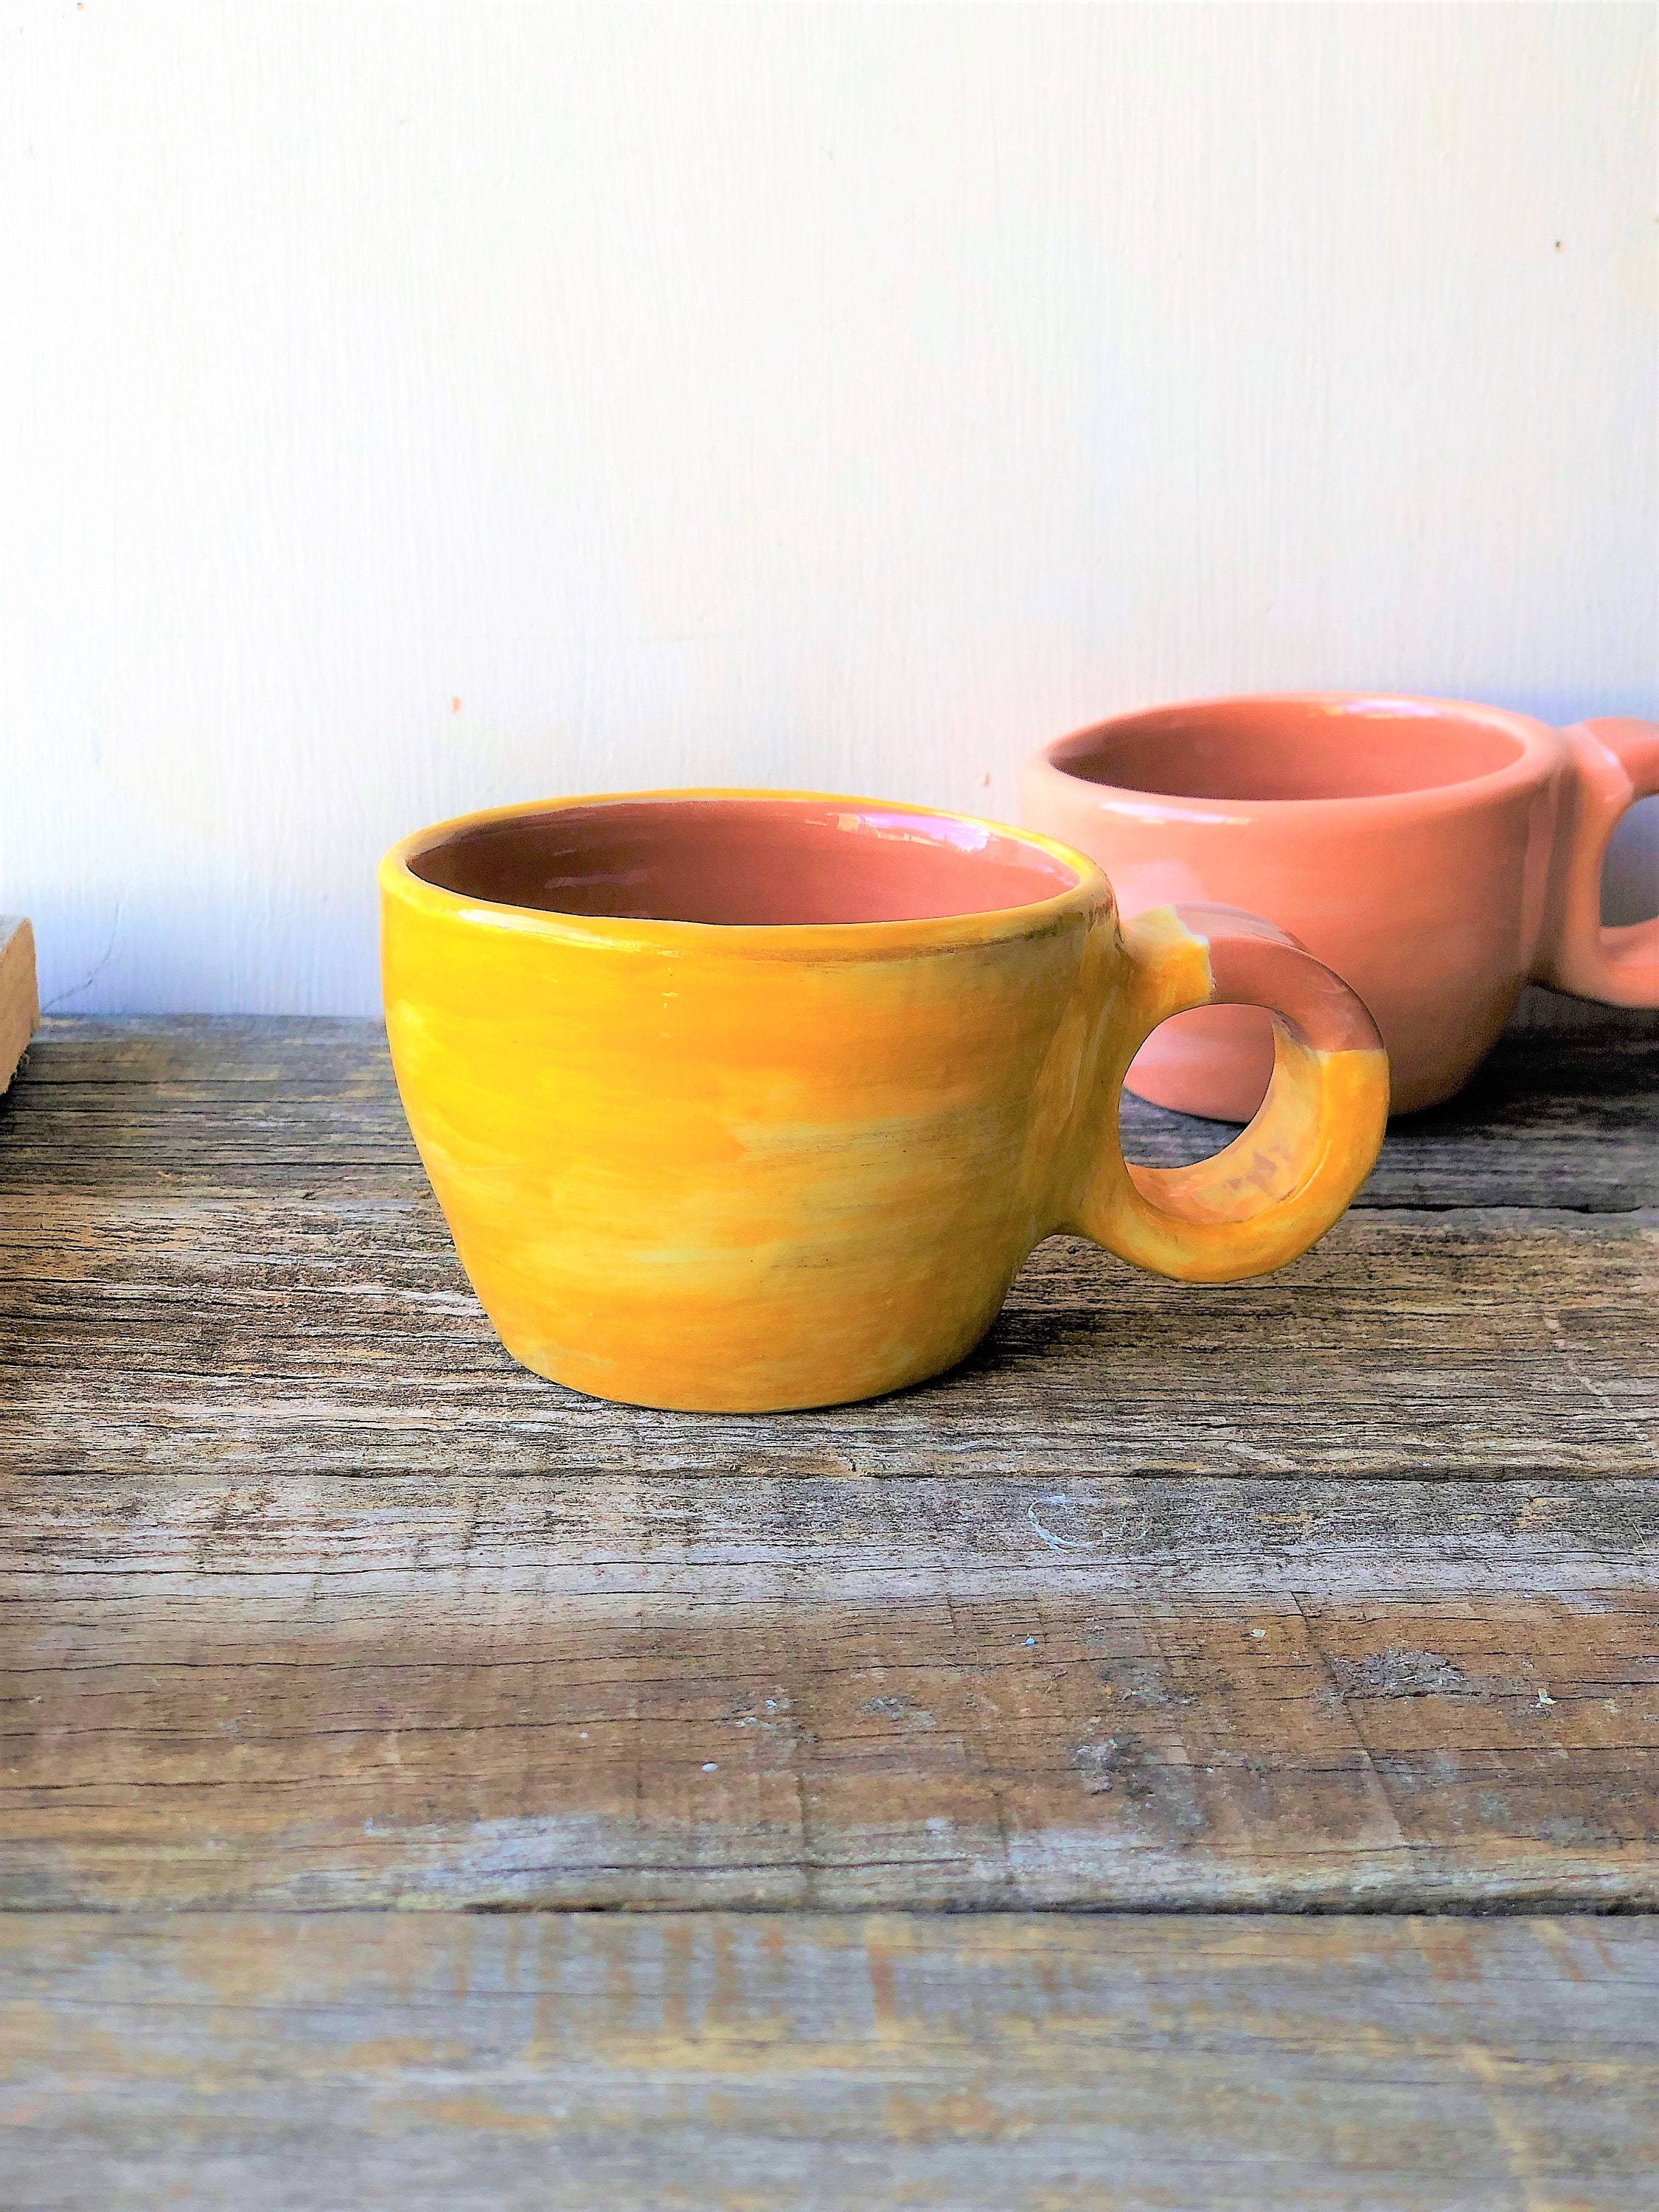 Handmade Ceramic Keep-cup lid Included 6oz, 7oz, 8oz, Coffee, Espresso,  Piccolo, Latte Mother's Day Gift Pottery Travel 